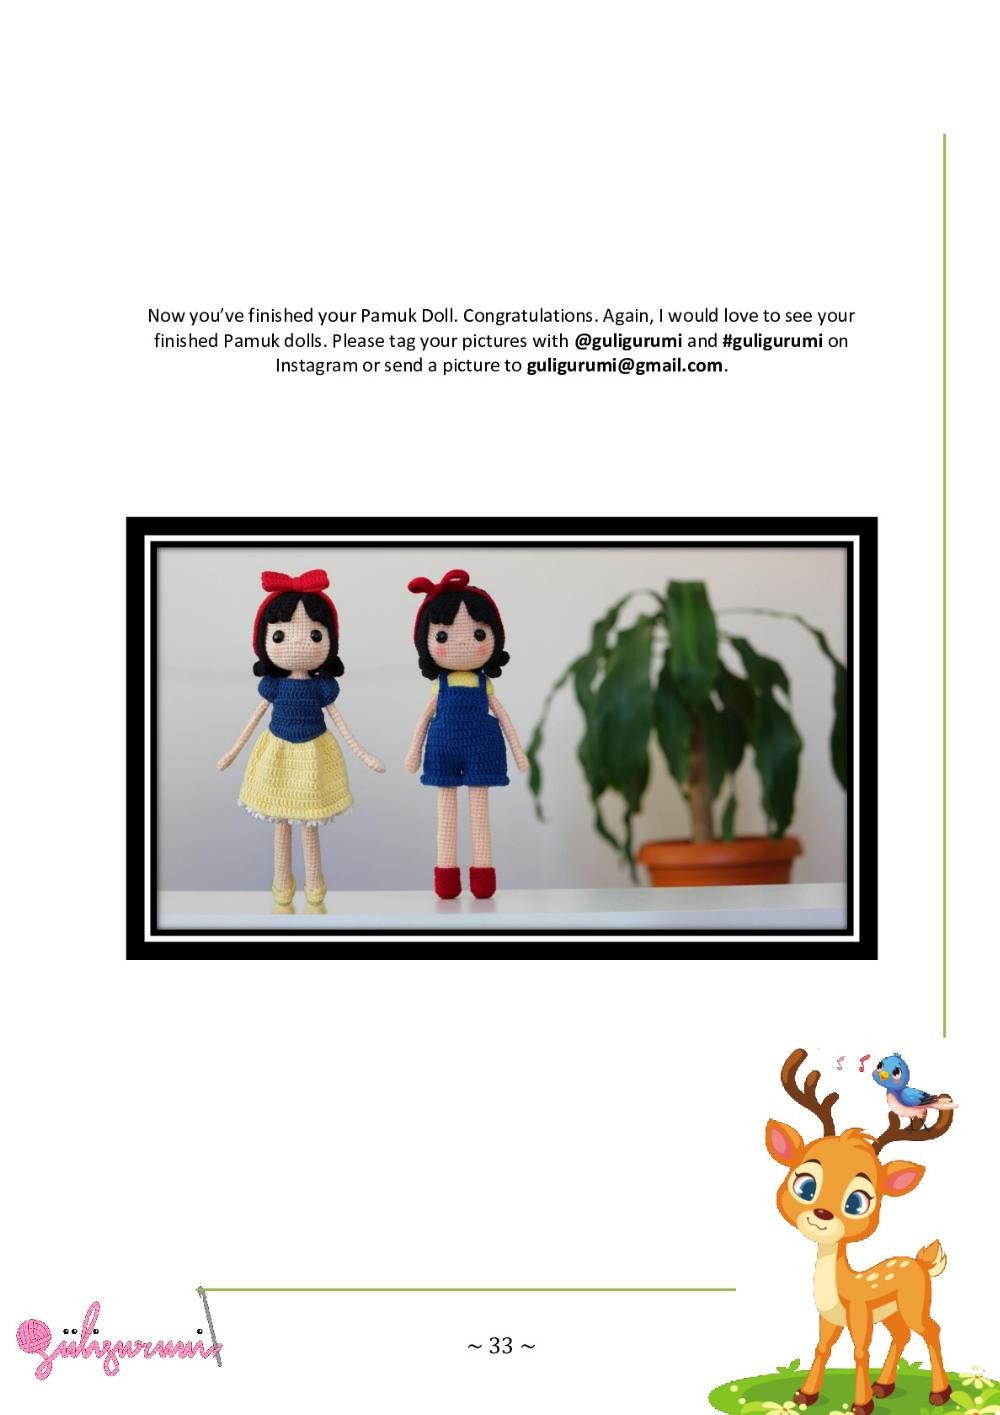 Snow White princess crochet pattern wearing skirt and overalls